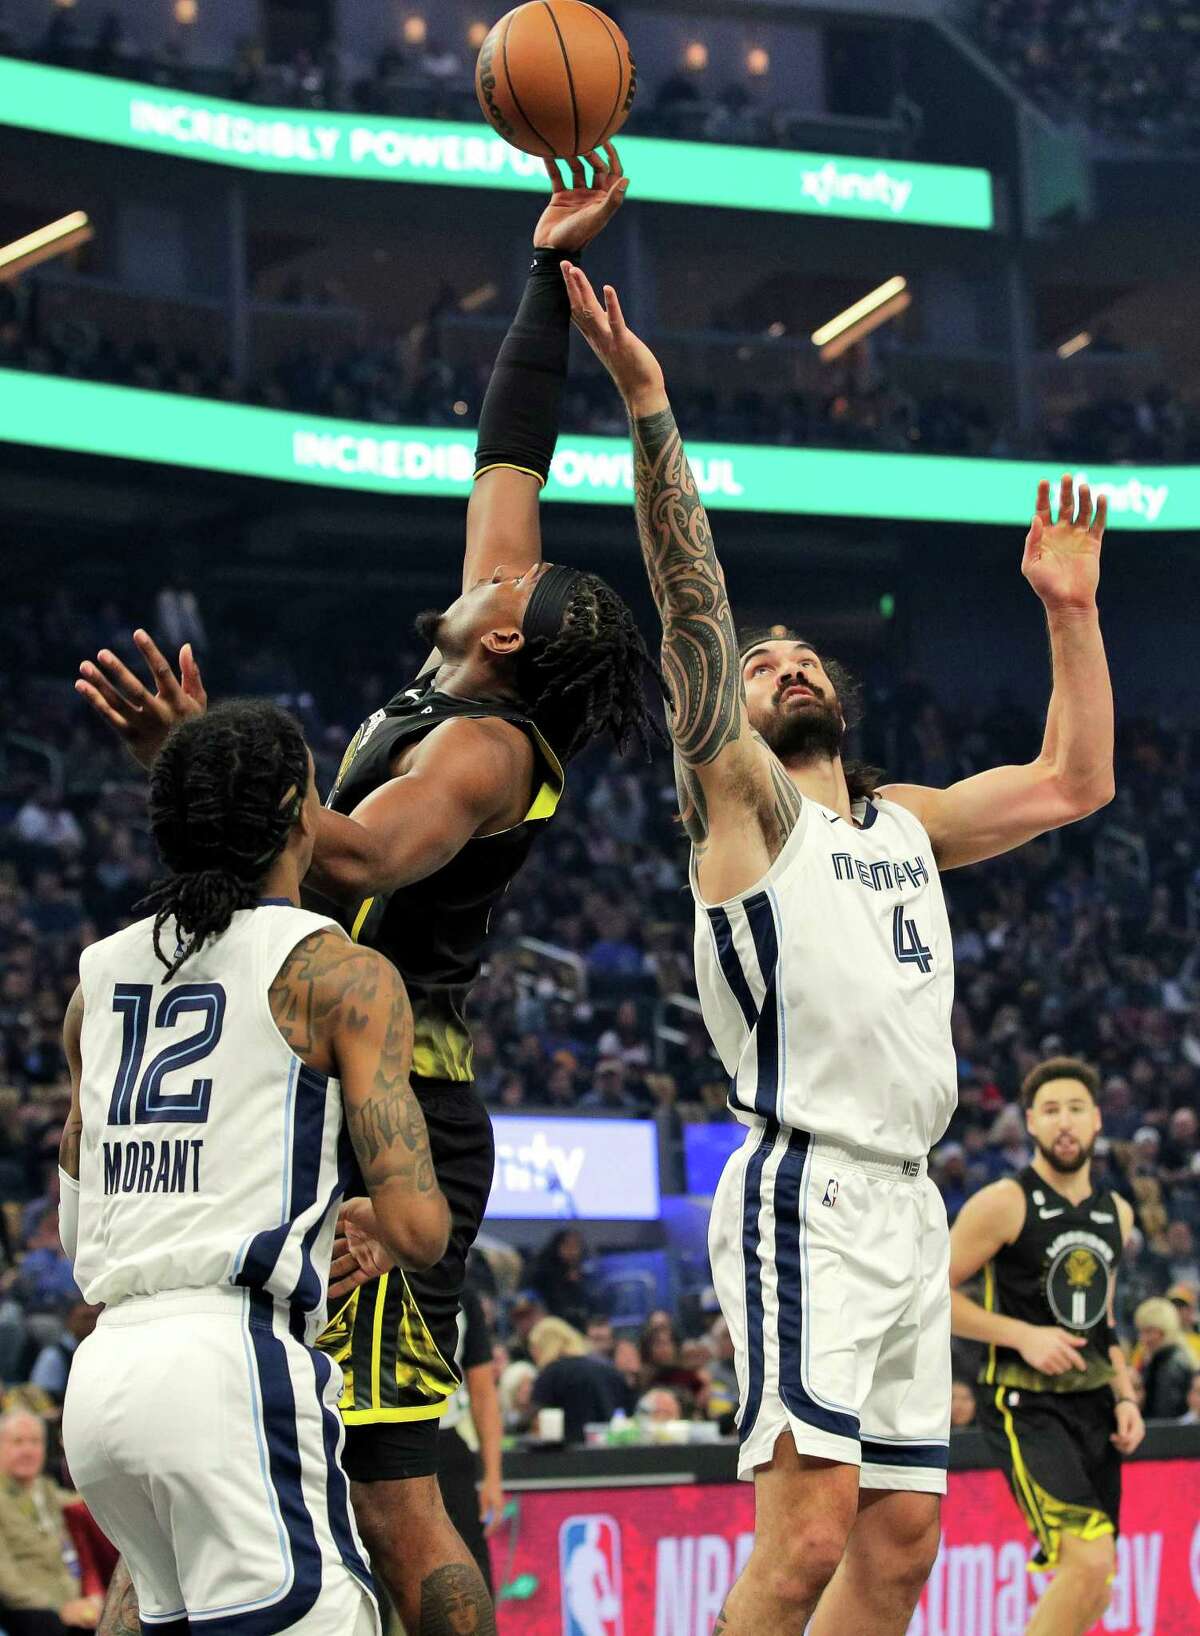 Kevon Looney (5) reaches a rebound ahead of Stephen Adams (4) In the first half as the Golden State Warriors played the Memphis Grizzlies at Chase Center in San Francisco, Calif., on Sunday, December 25, 2022.